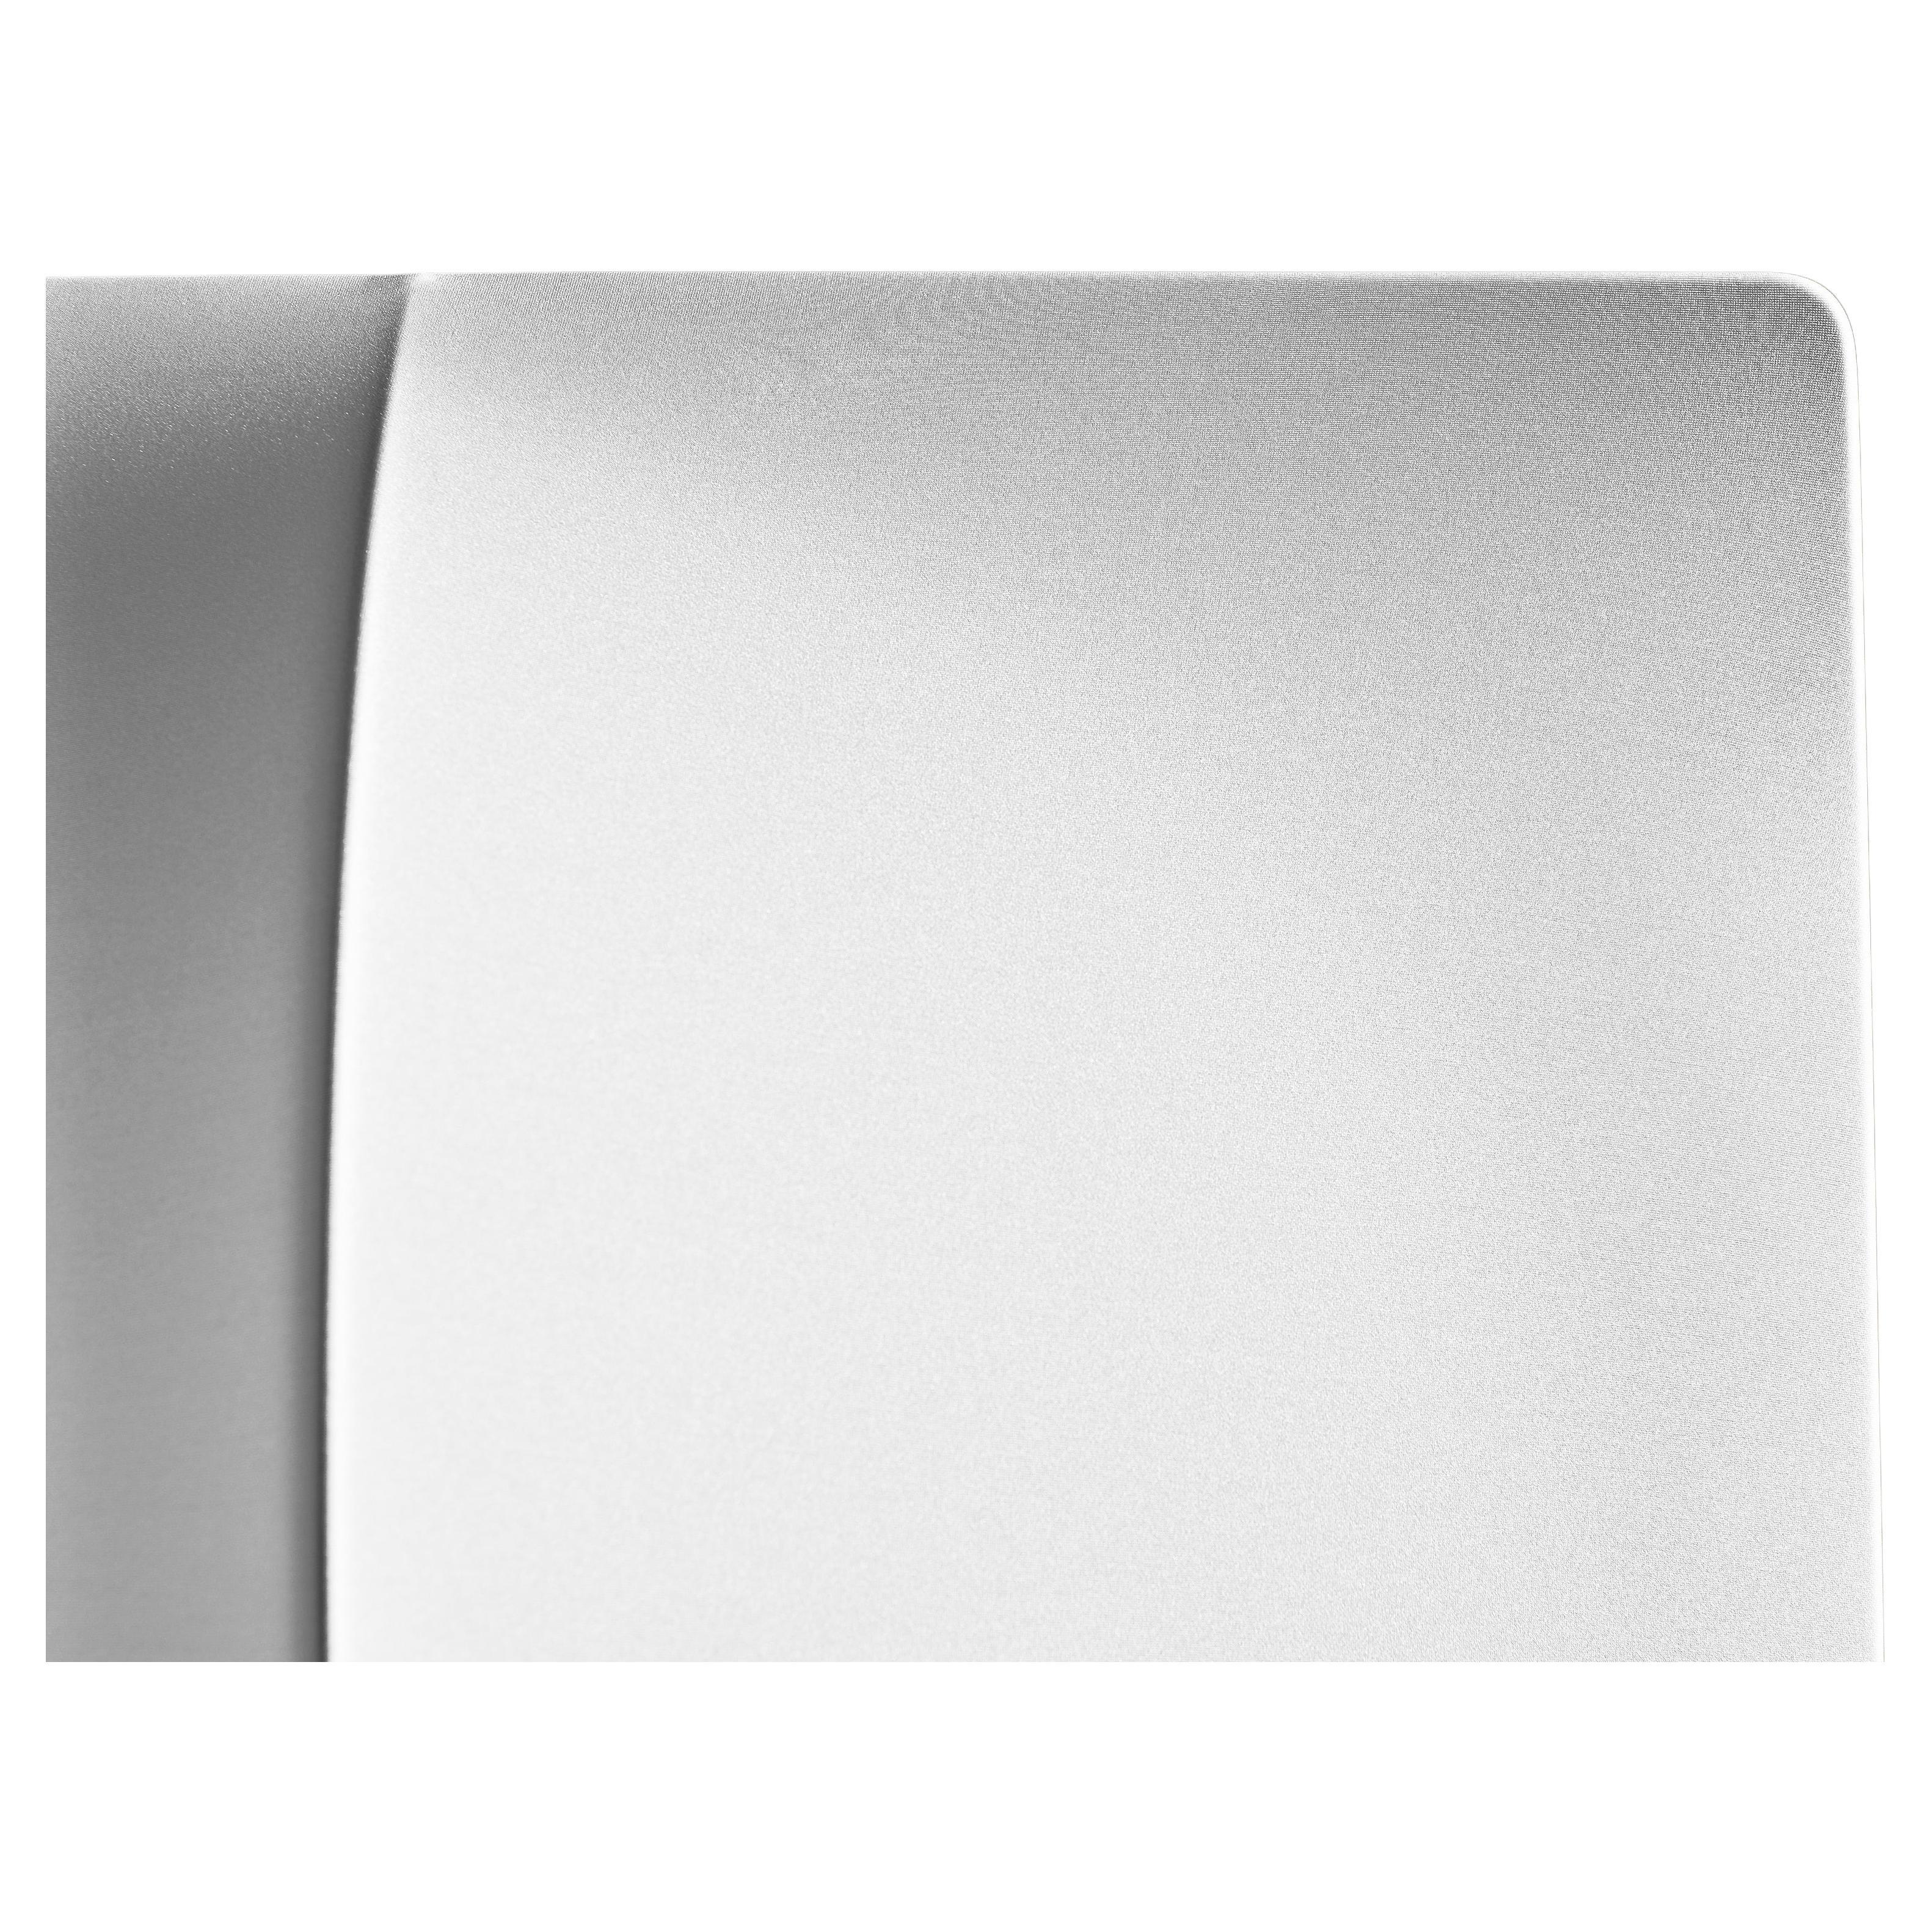 Axolight Large 140 Nelly Wall Lamp in White by Manuel & Vanessa Vivian